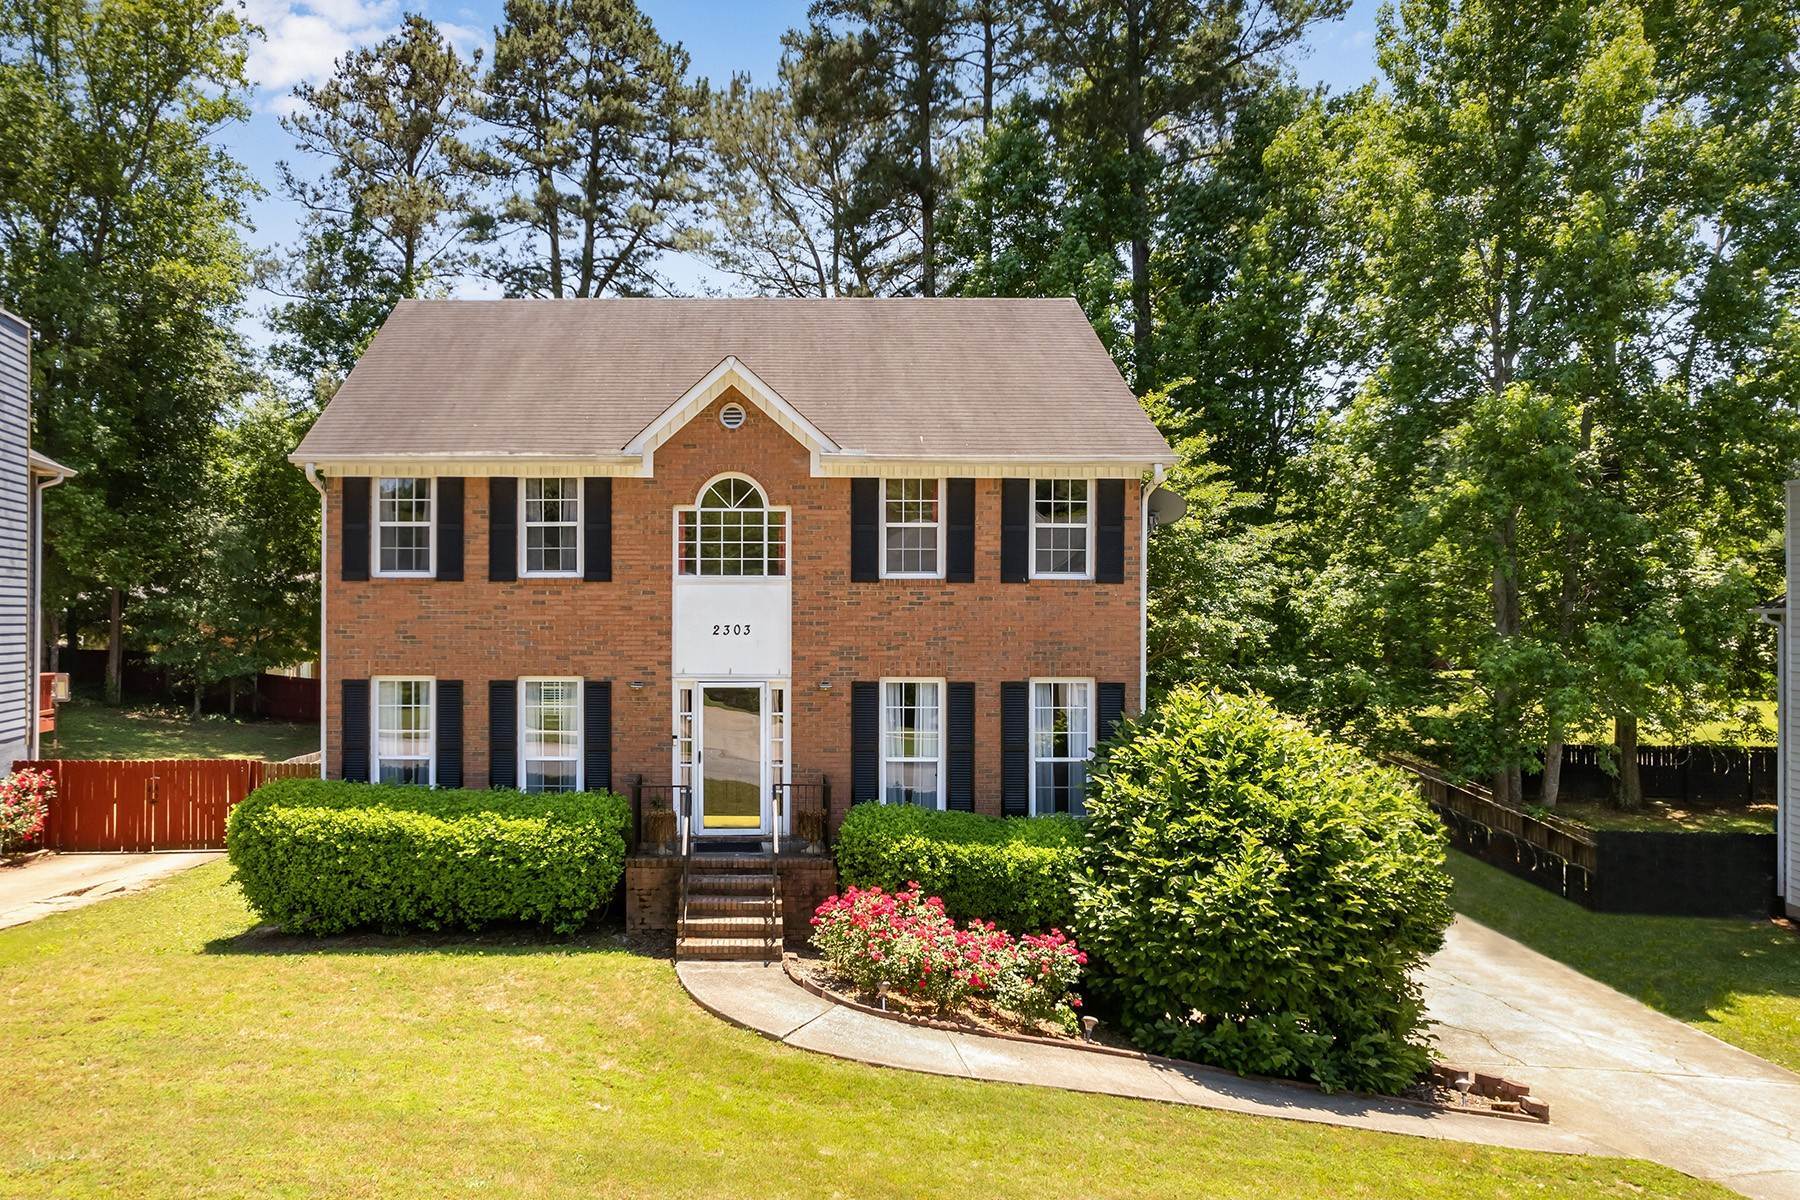 Single Family Homes for Sale at Traditional Well Maintained Multi-story Home 2303 Luther Terrace SW Marietta, Georgia 30064 United States